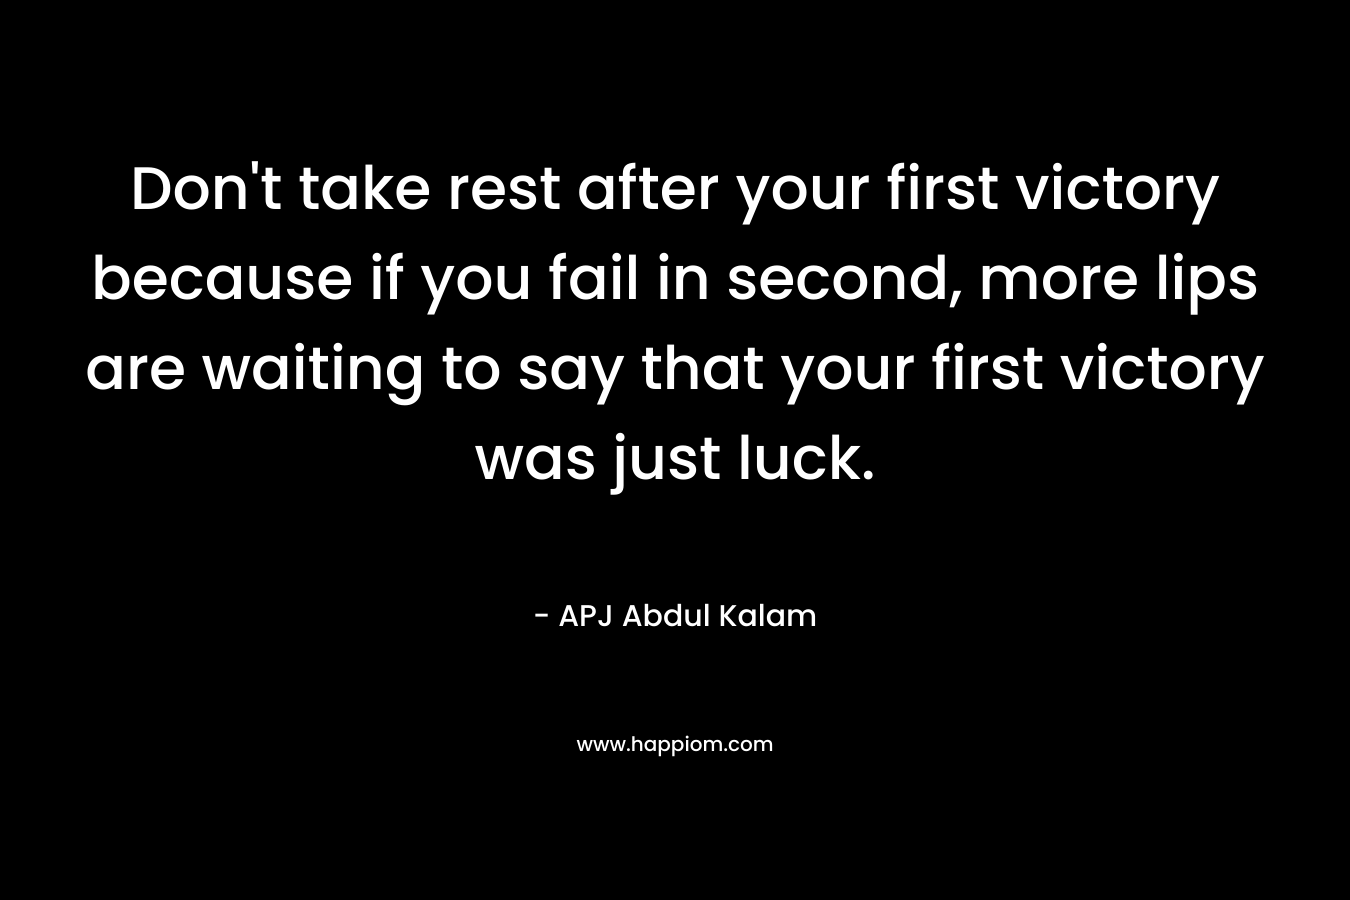 Don’t take rest after your first victory because if you fail in second, more lips are waiting to say that your first victory was just luck. – APJ Abdul Kalam